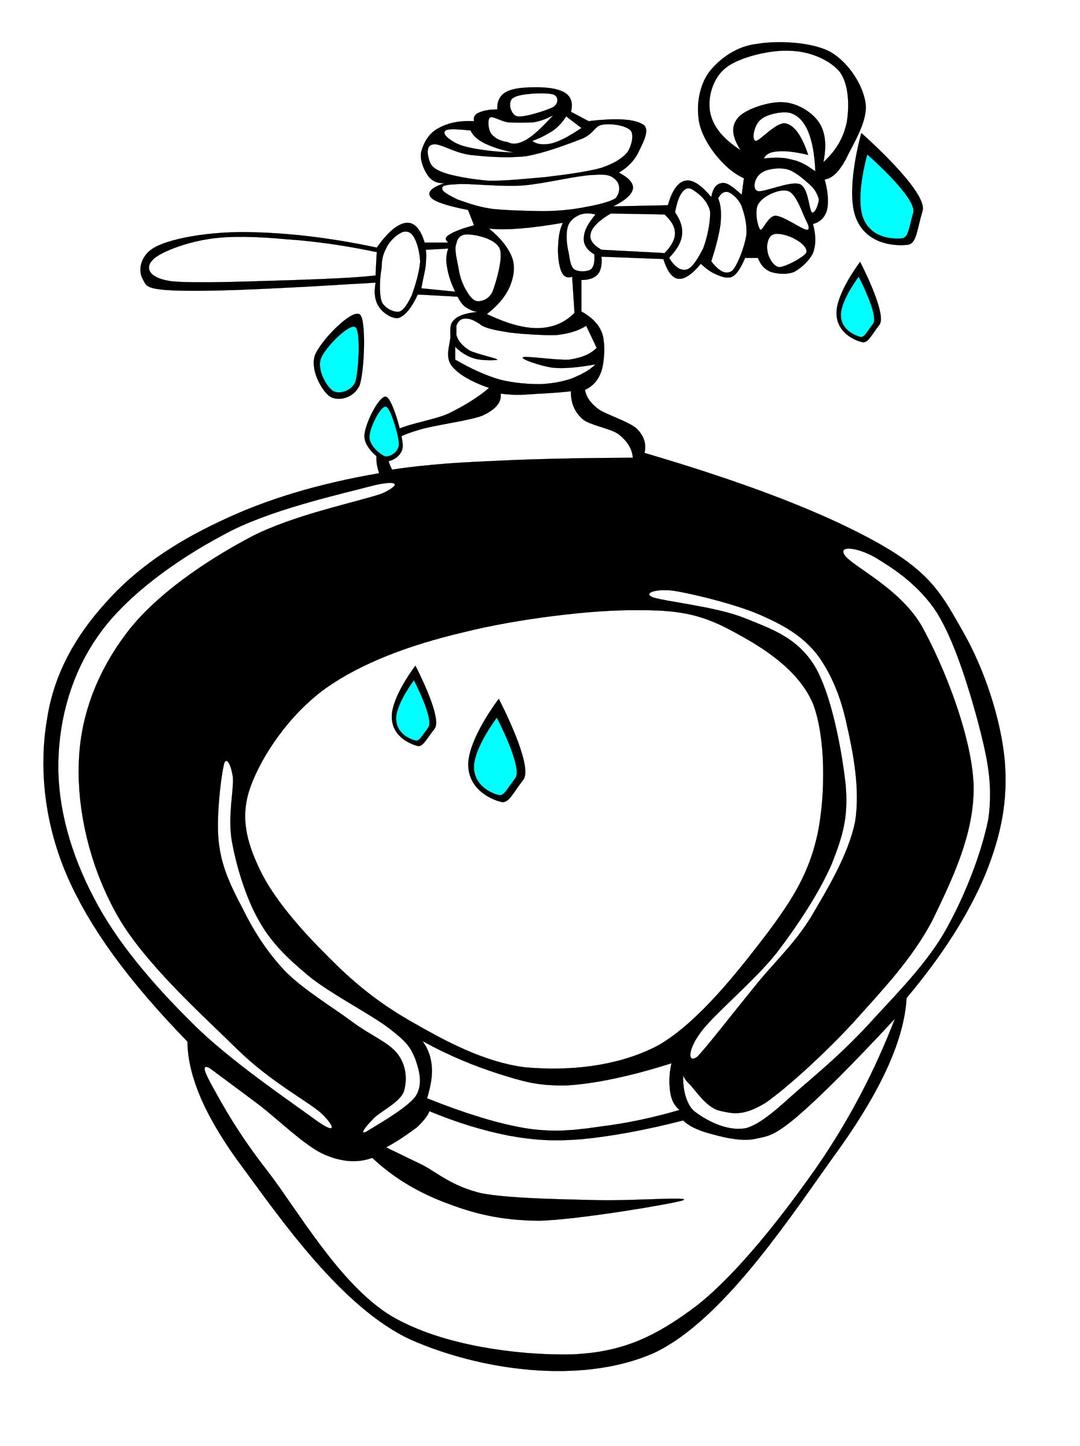 Leaking-Toilet png transparent